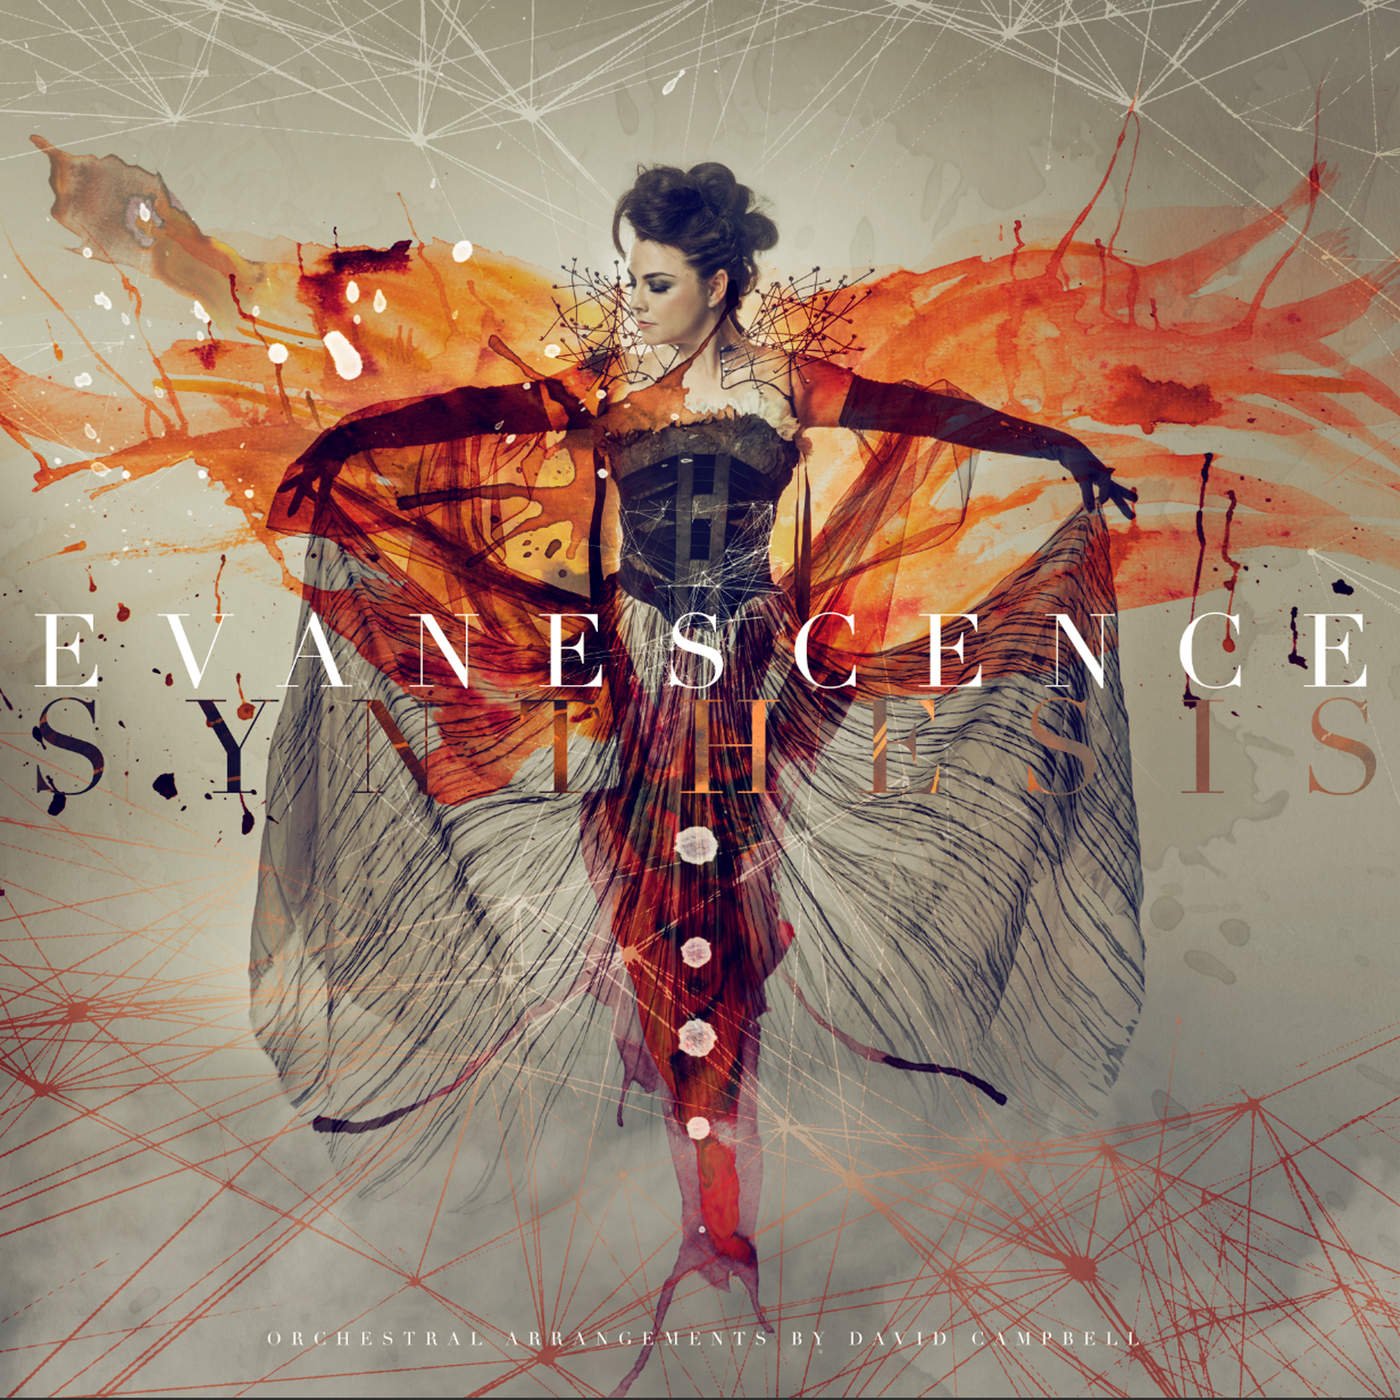 Evanescence - Synthesis (2017) 24bit FLAC Download